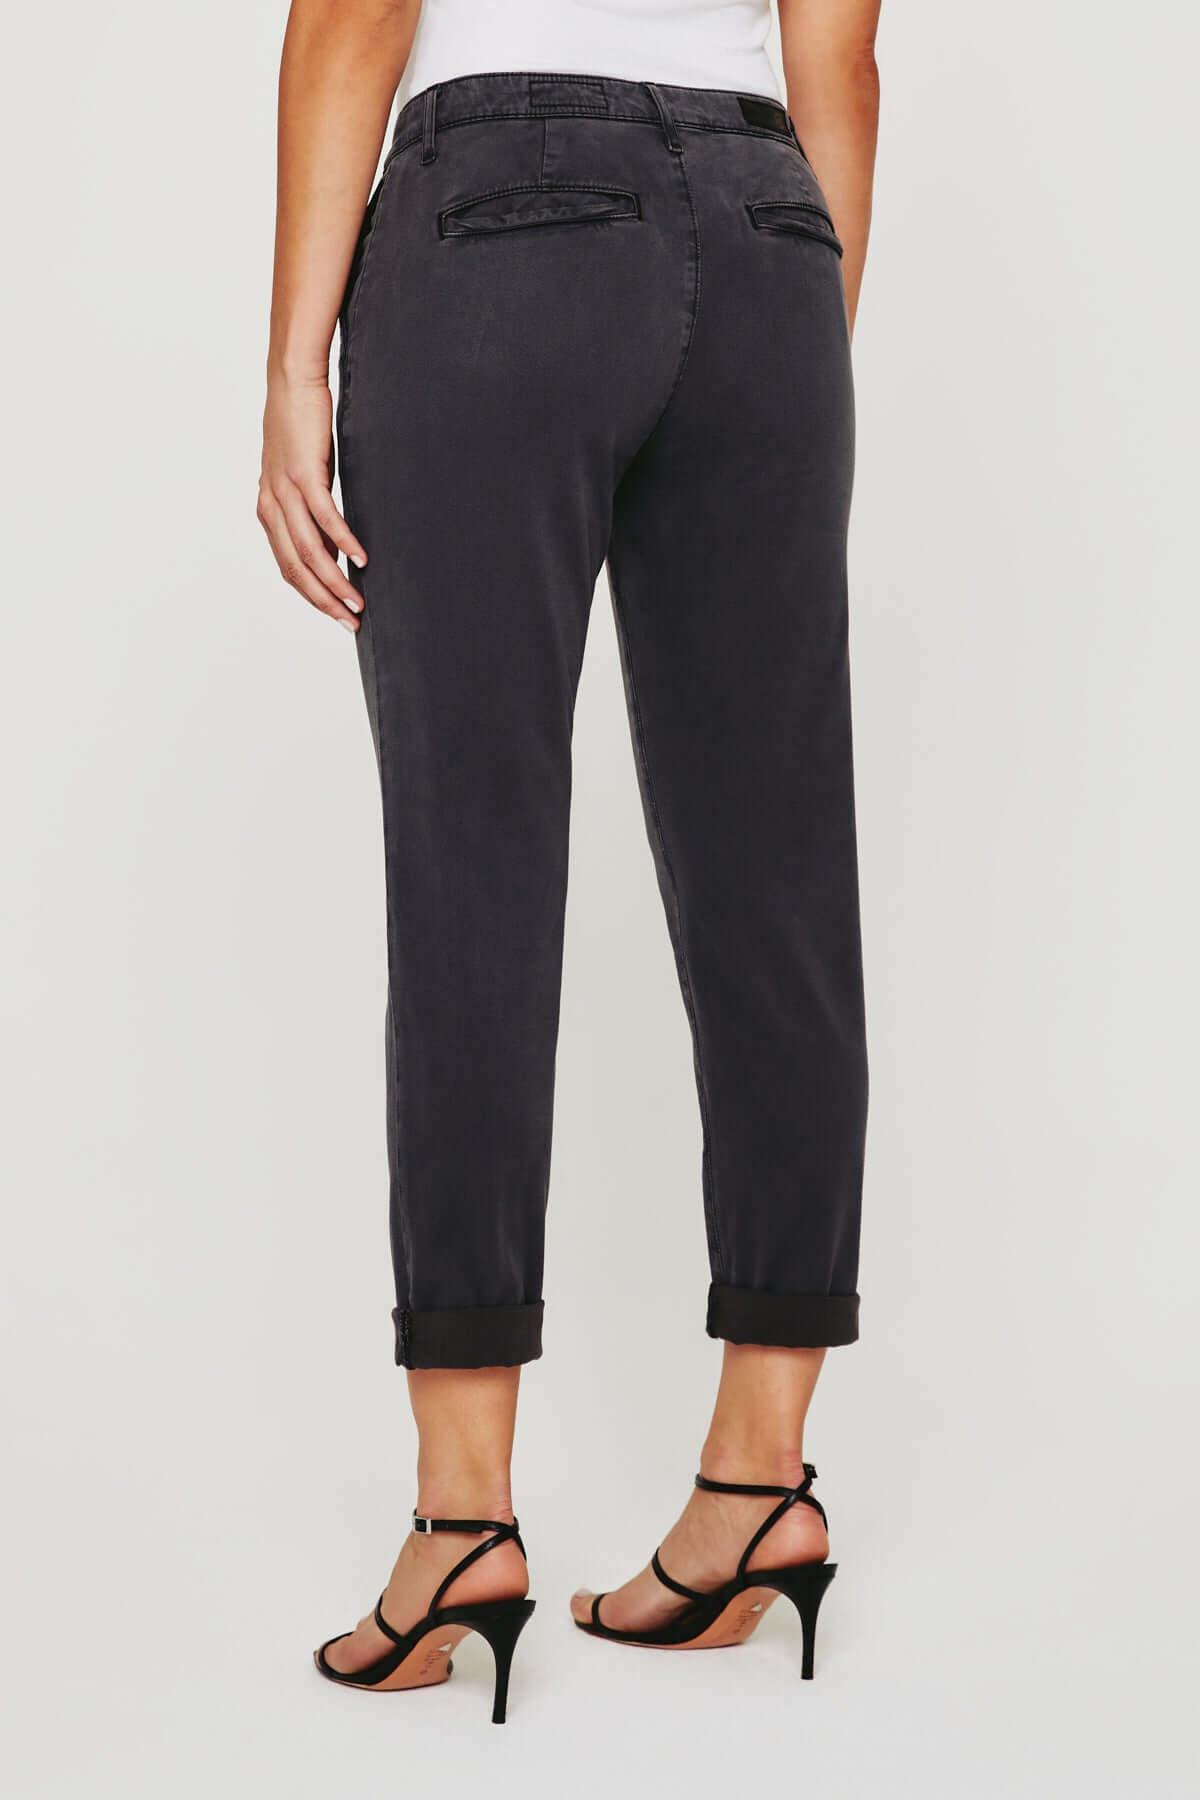 AG jeans caden tailored trouser in grey, rear view